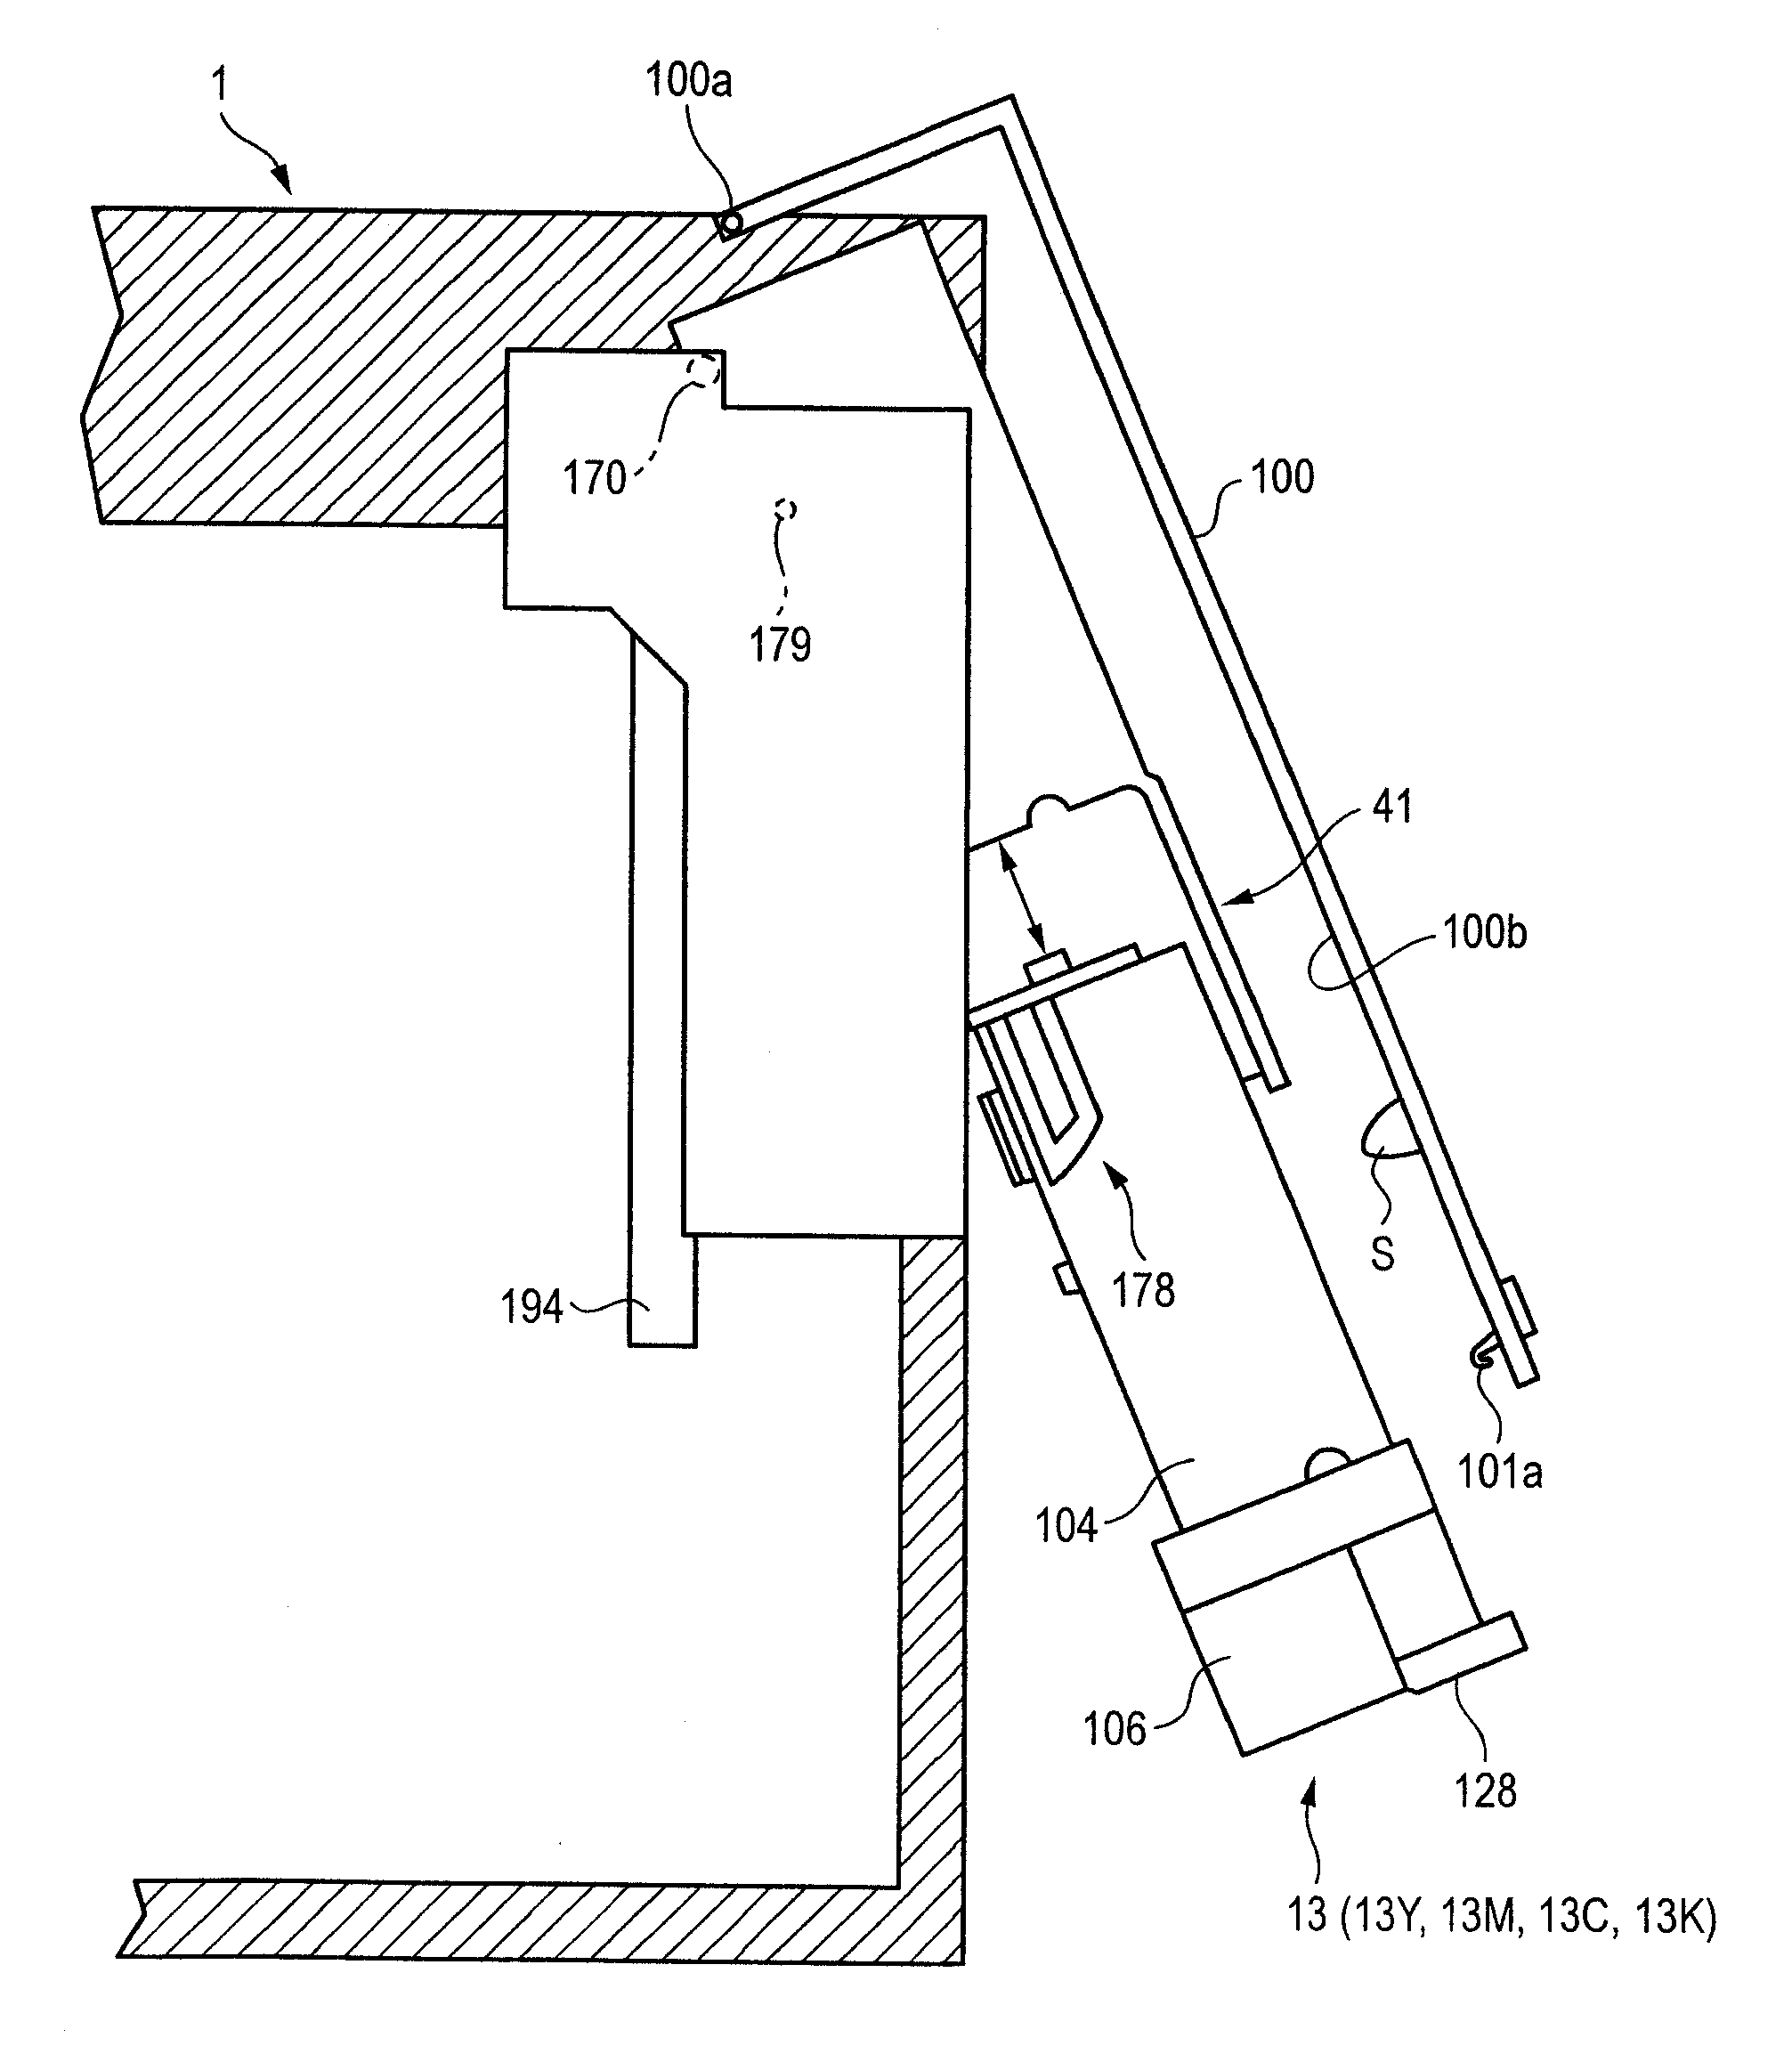 Image forming apparatus, regulating member and container